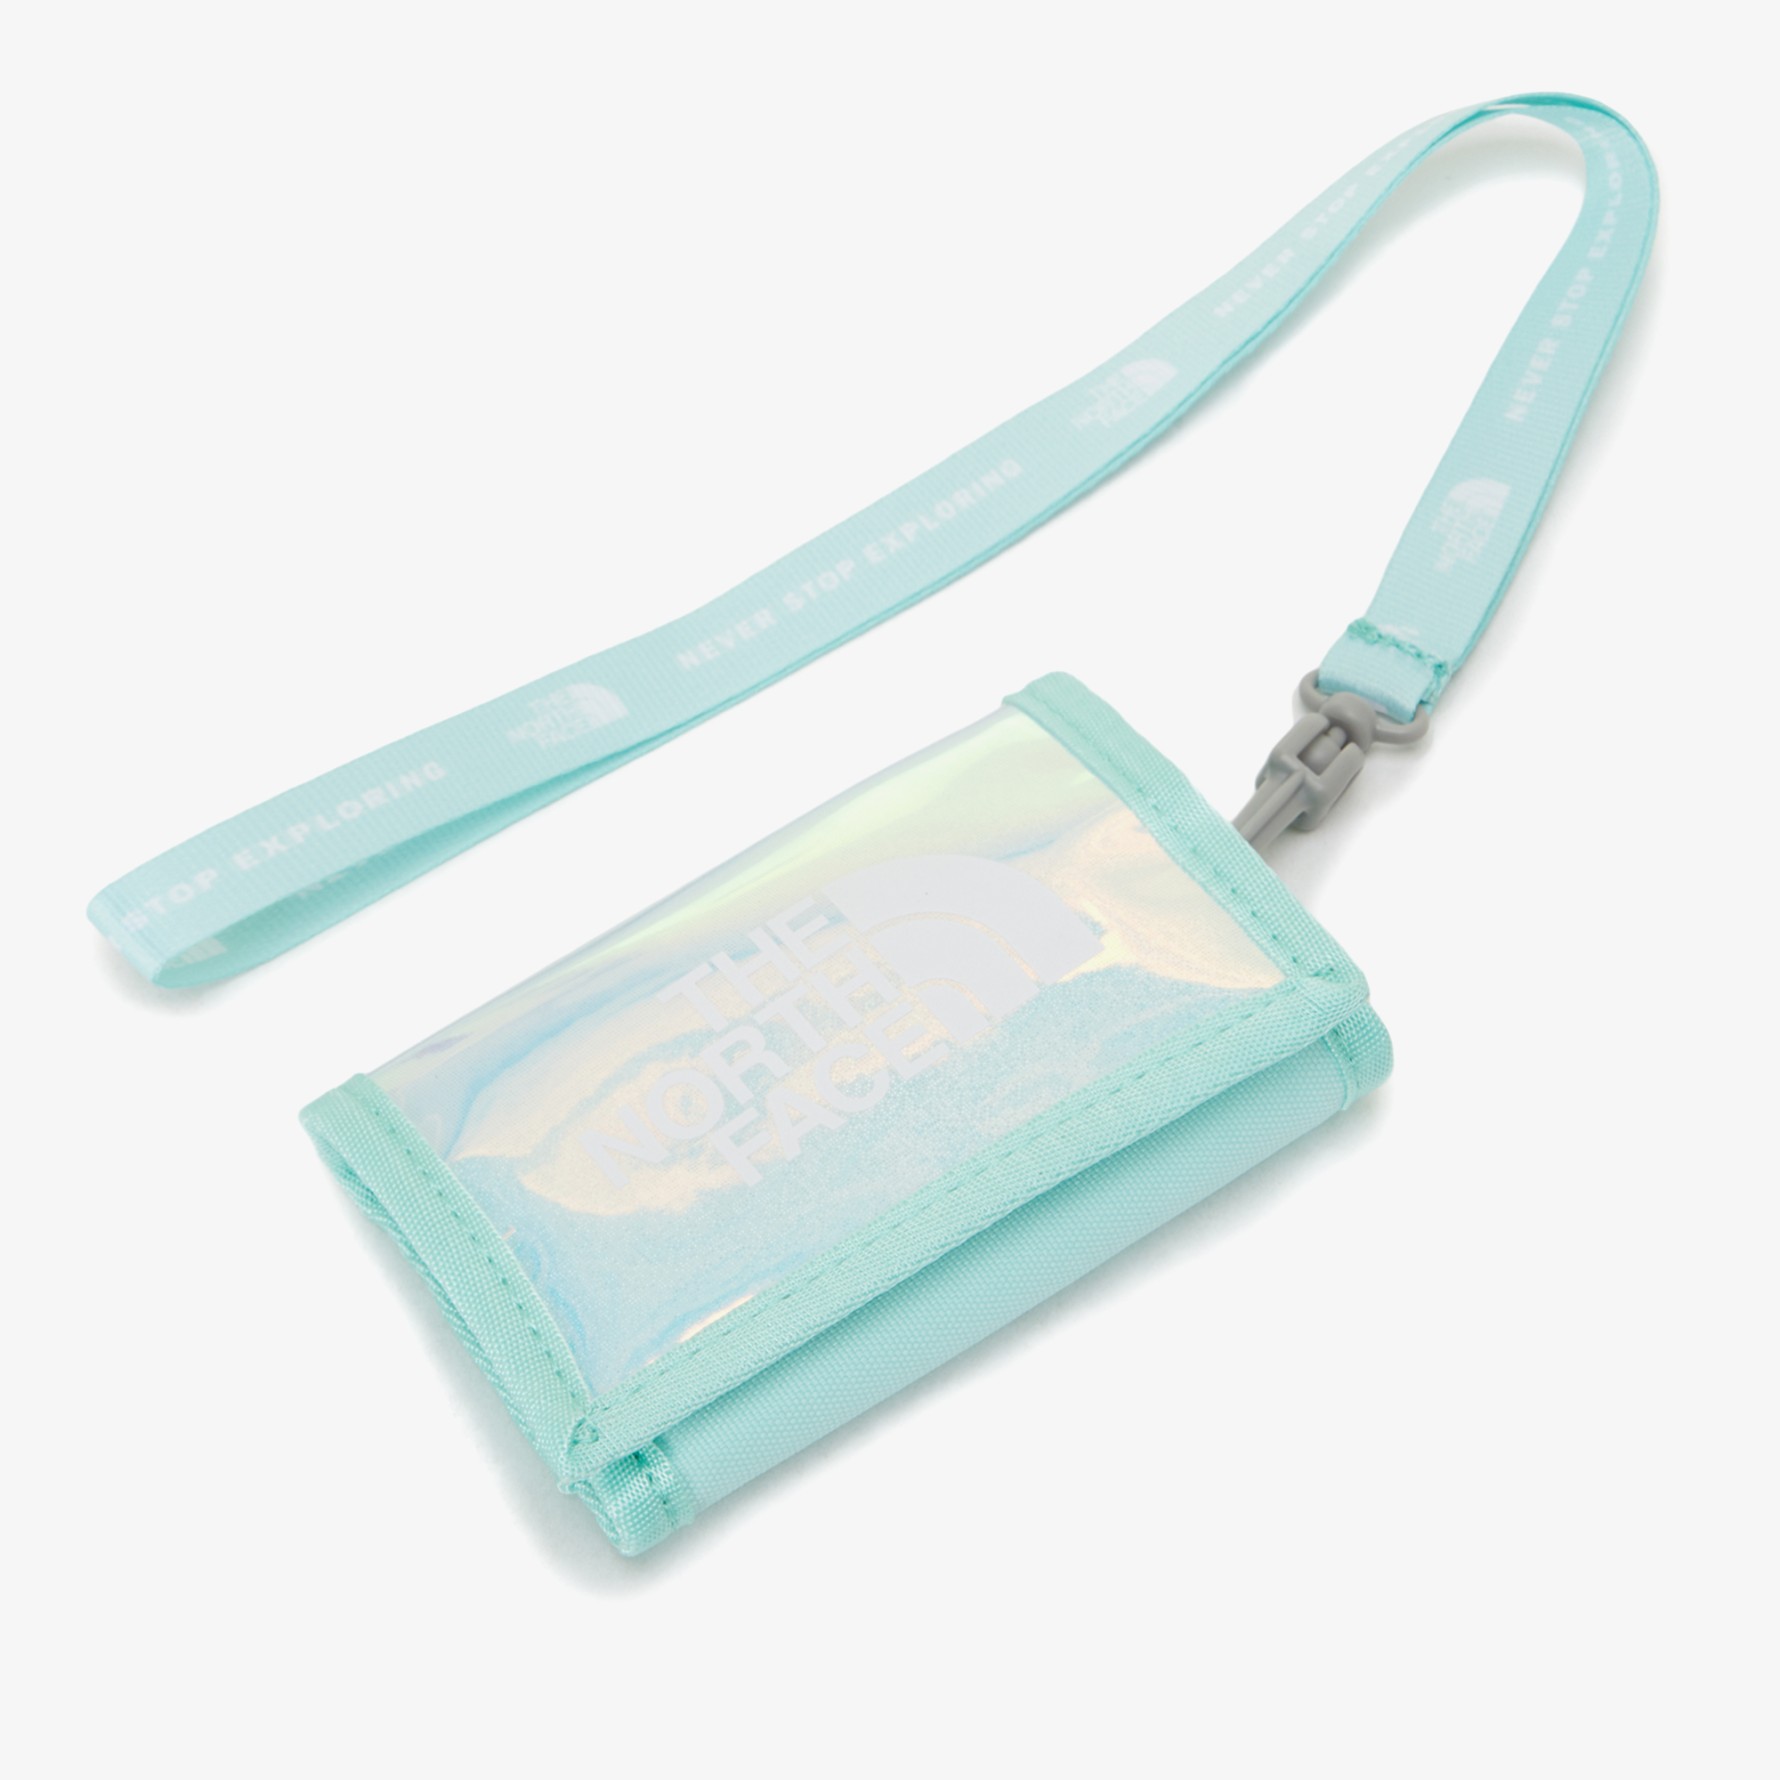 THE NORTH FACE - KIDS WALLET (MINT)